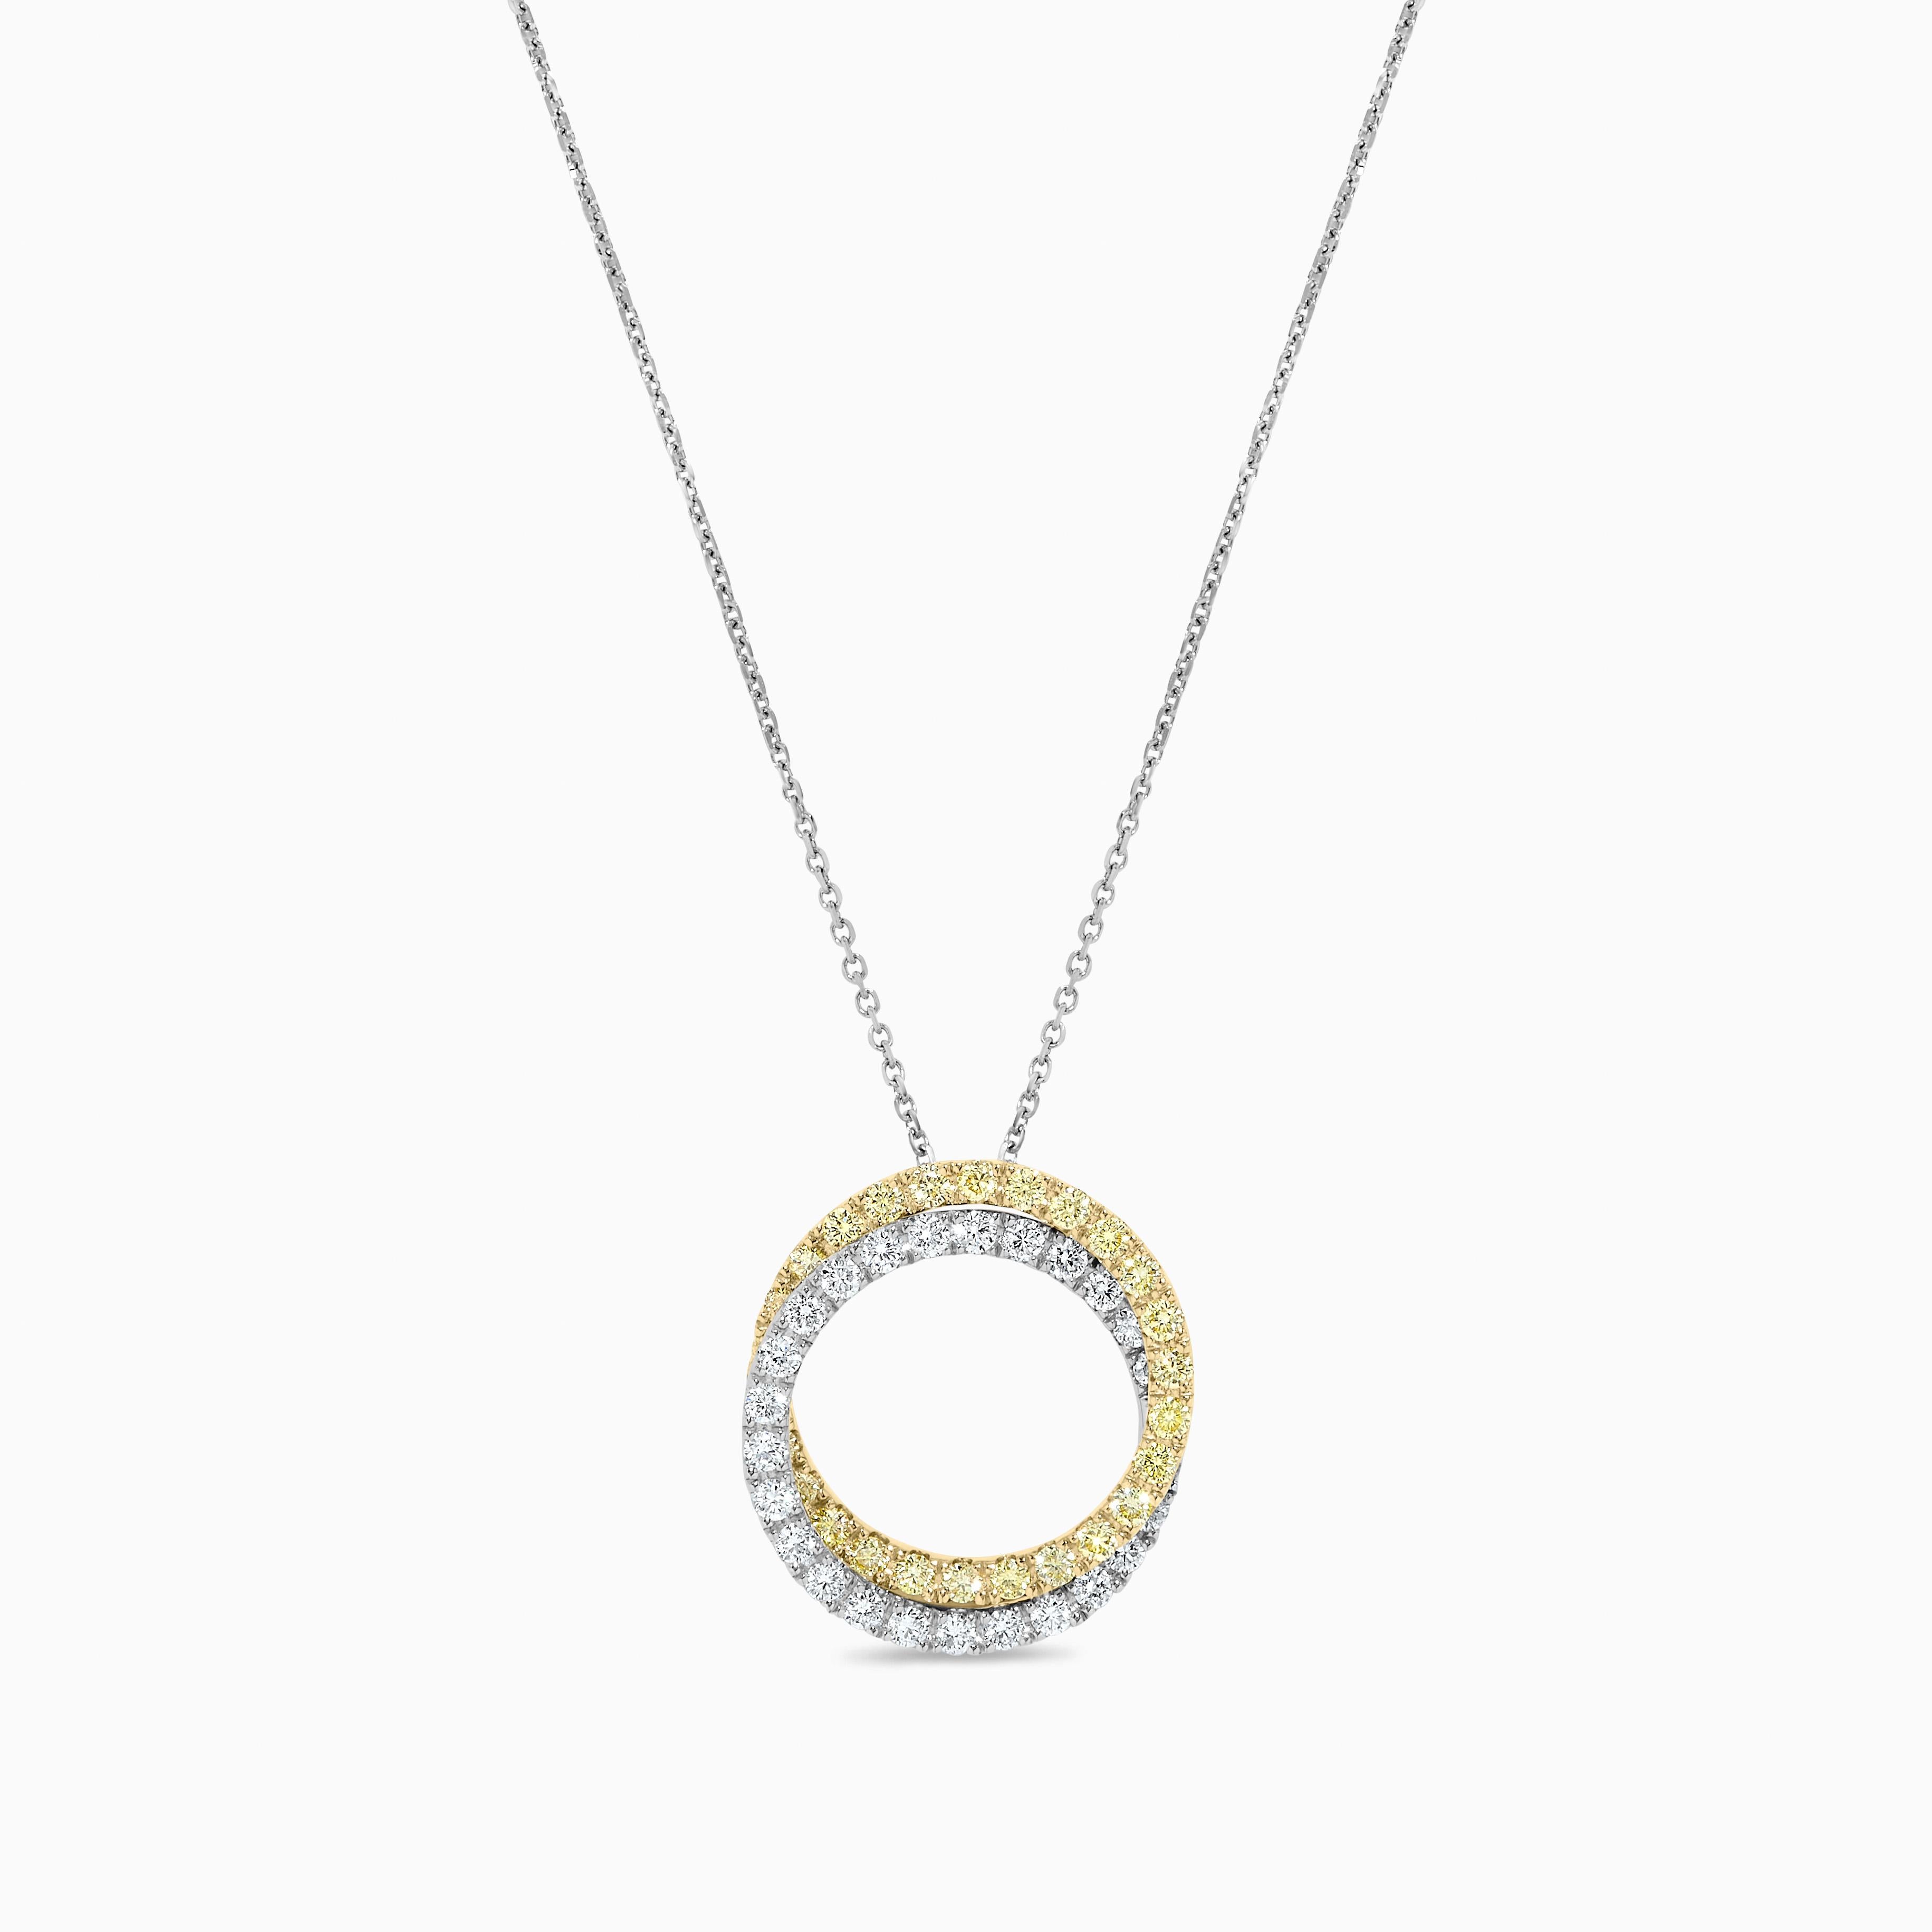 RareGemWorld's classic diamond necklace. Mounted in a beautiful 18K Yellow and White Gold setting with natural round yellow diamond melee complimented by natural round white diamond melee. This necklace is guaranteed to impress and enhance your